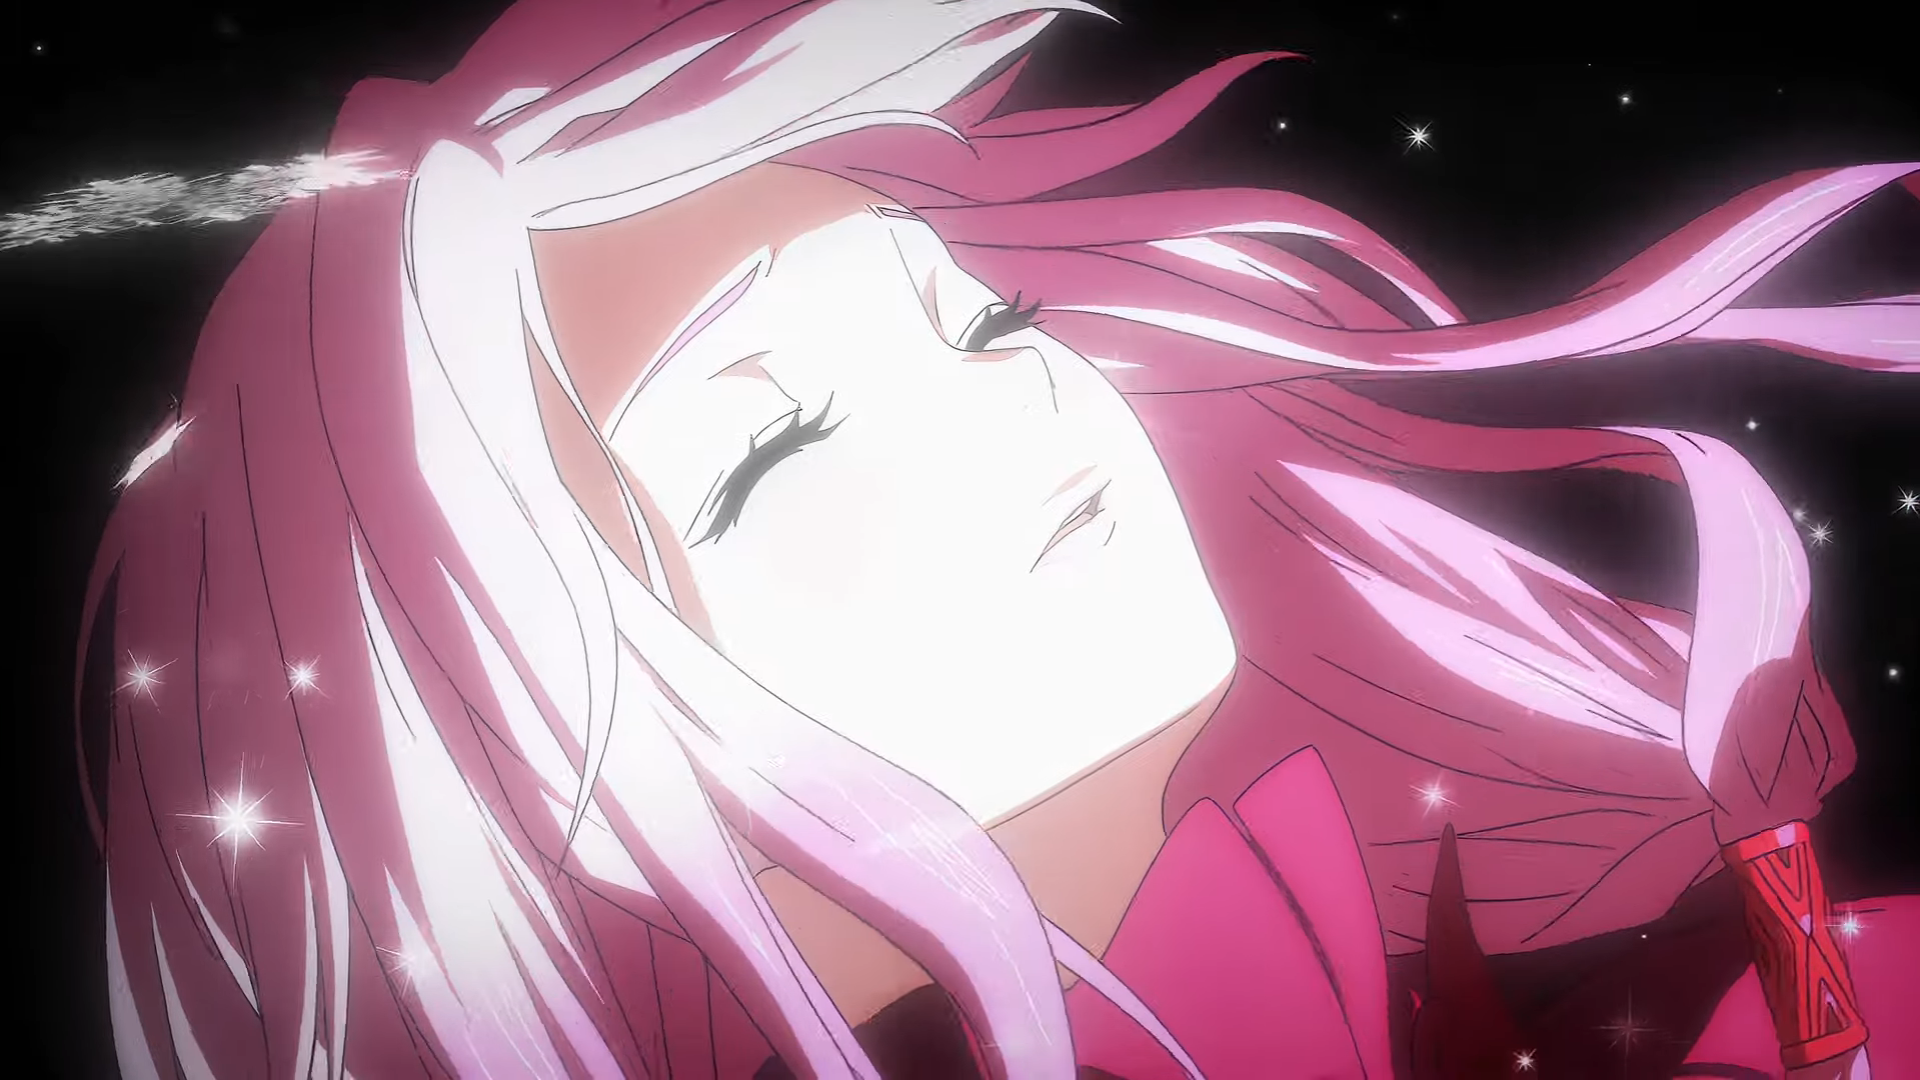 Music Group EGOIST, Known for Guilty Crown & Psycho Pass, Announces Incoming Disbandment